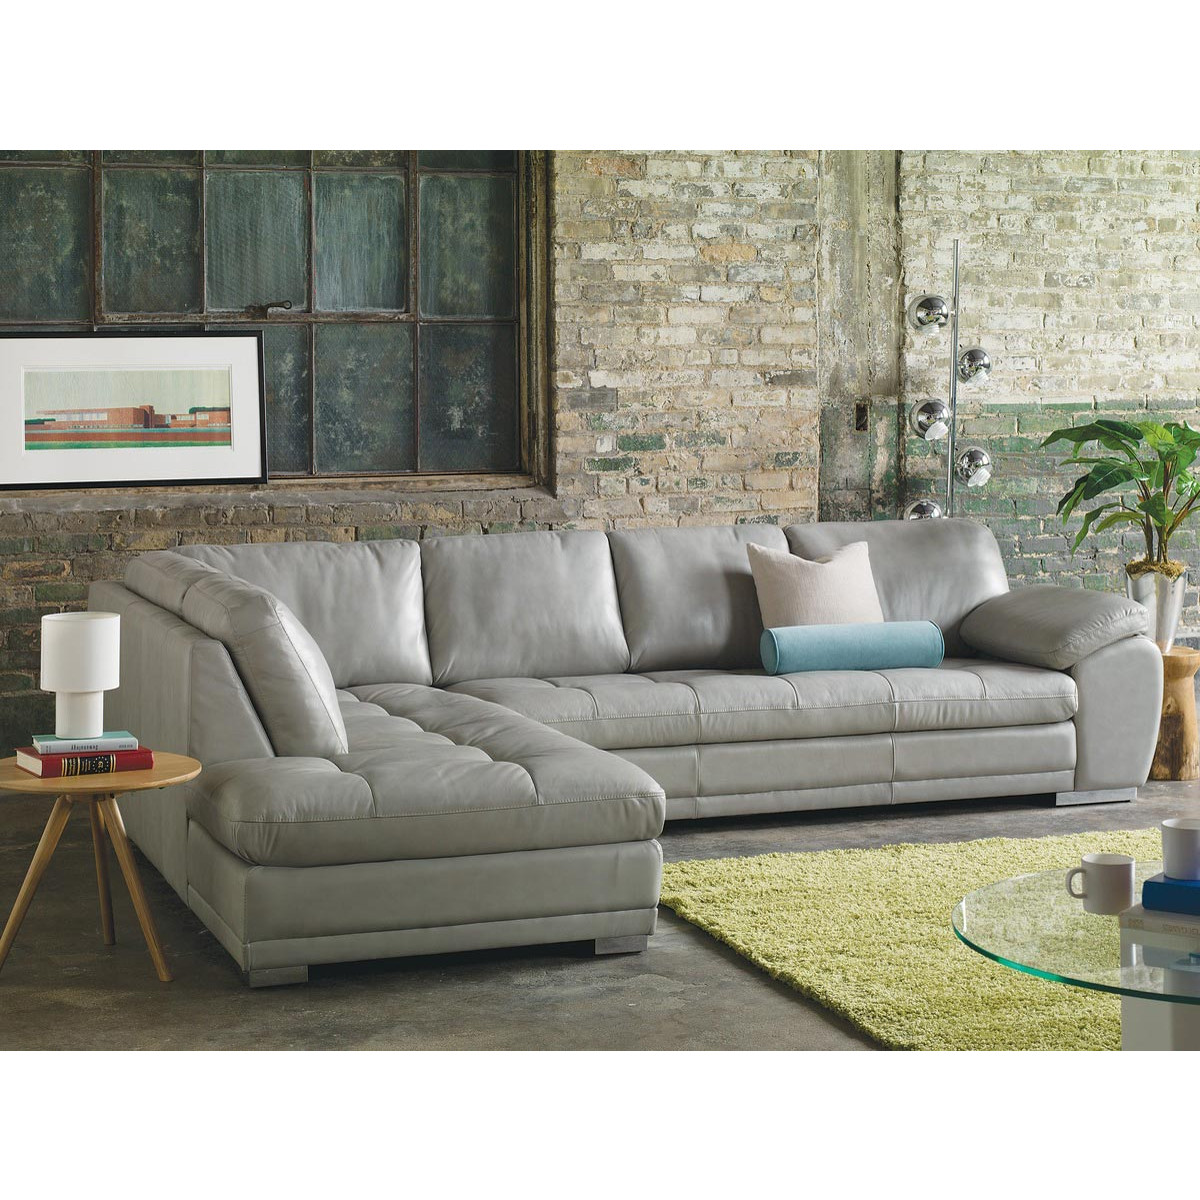 Palliser Miami Sectional From 1 968 00, Palliser Leather Couch